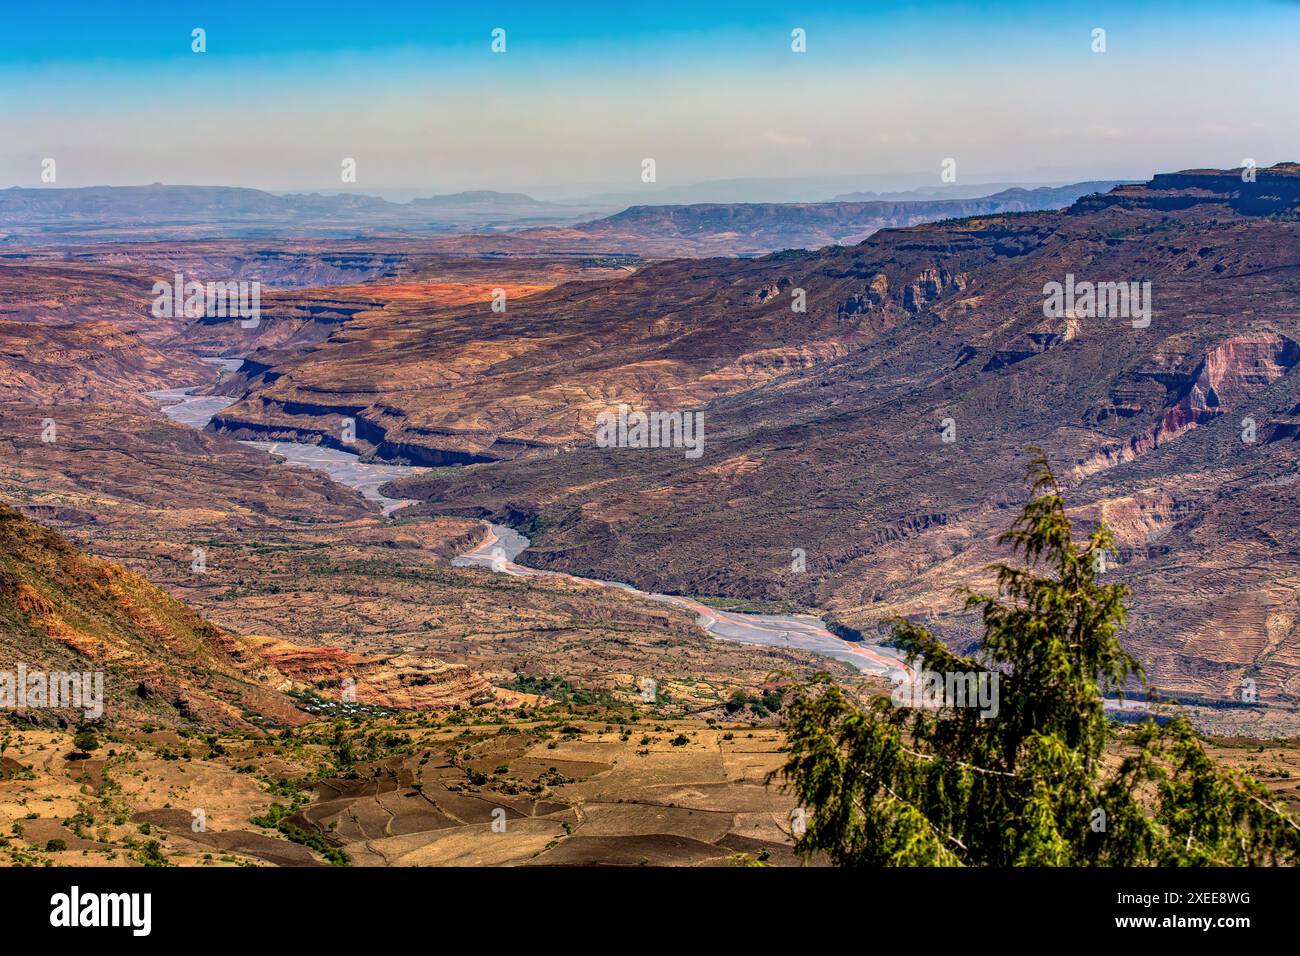 Beautiful mountain landscape with canyon and dry river bed, Oromia Region. Ethiopia wilderness landscape, Africa. Stock Photo